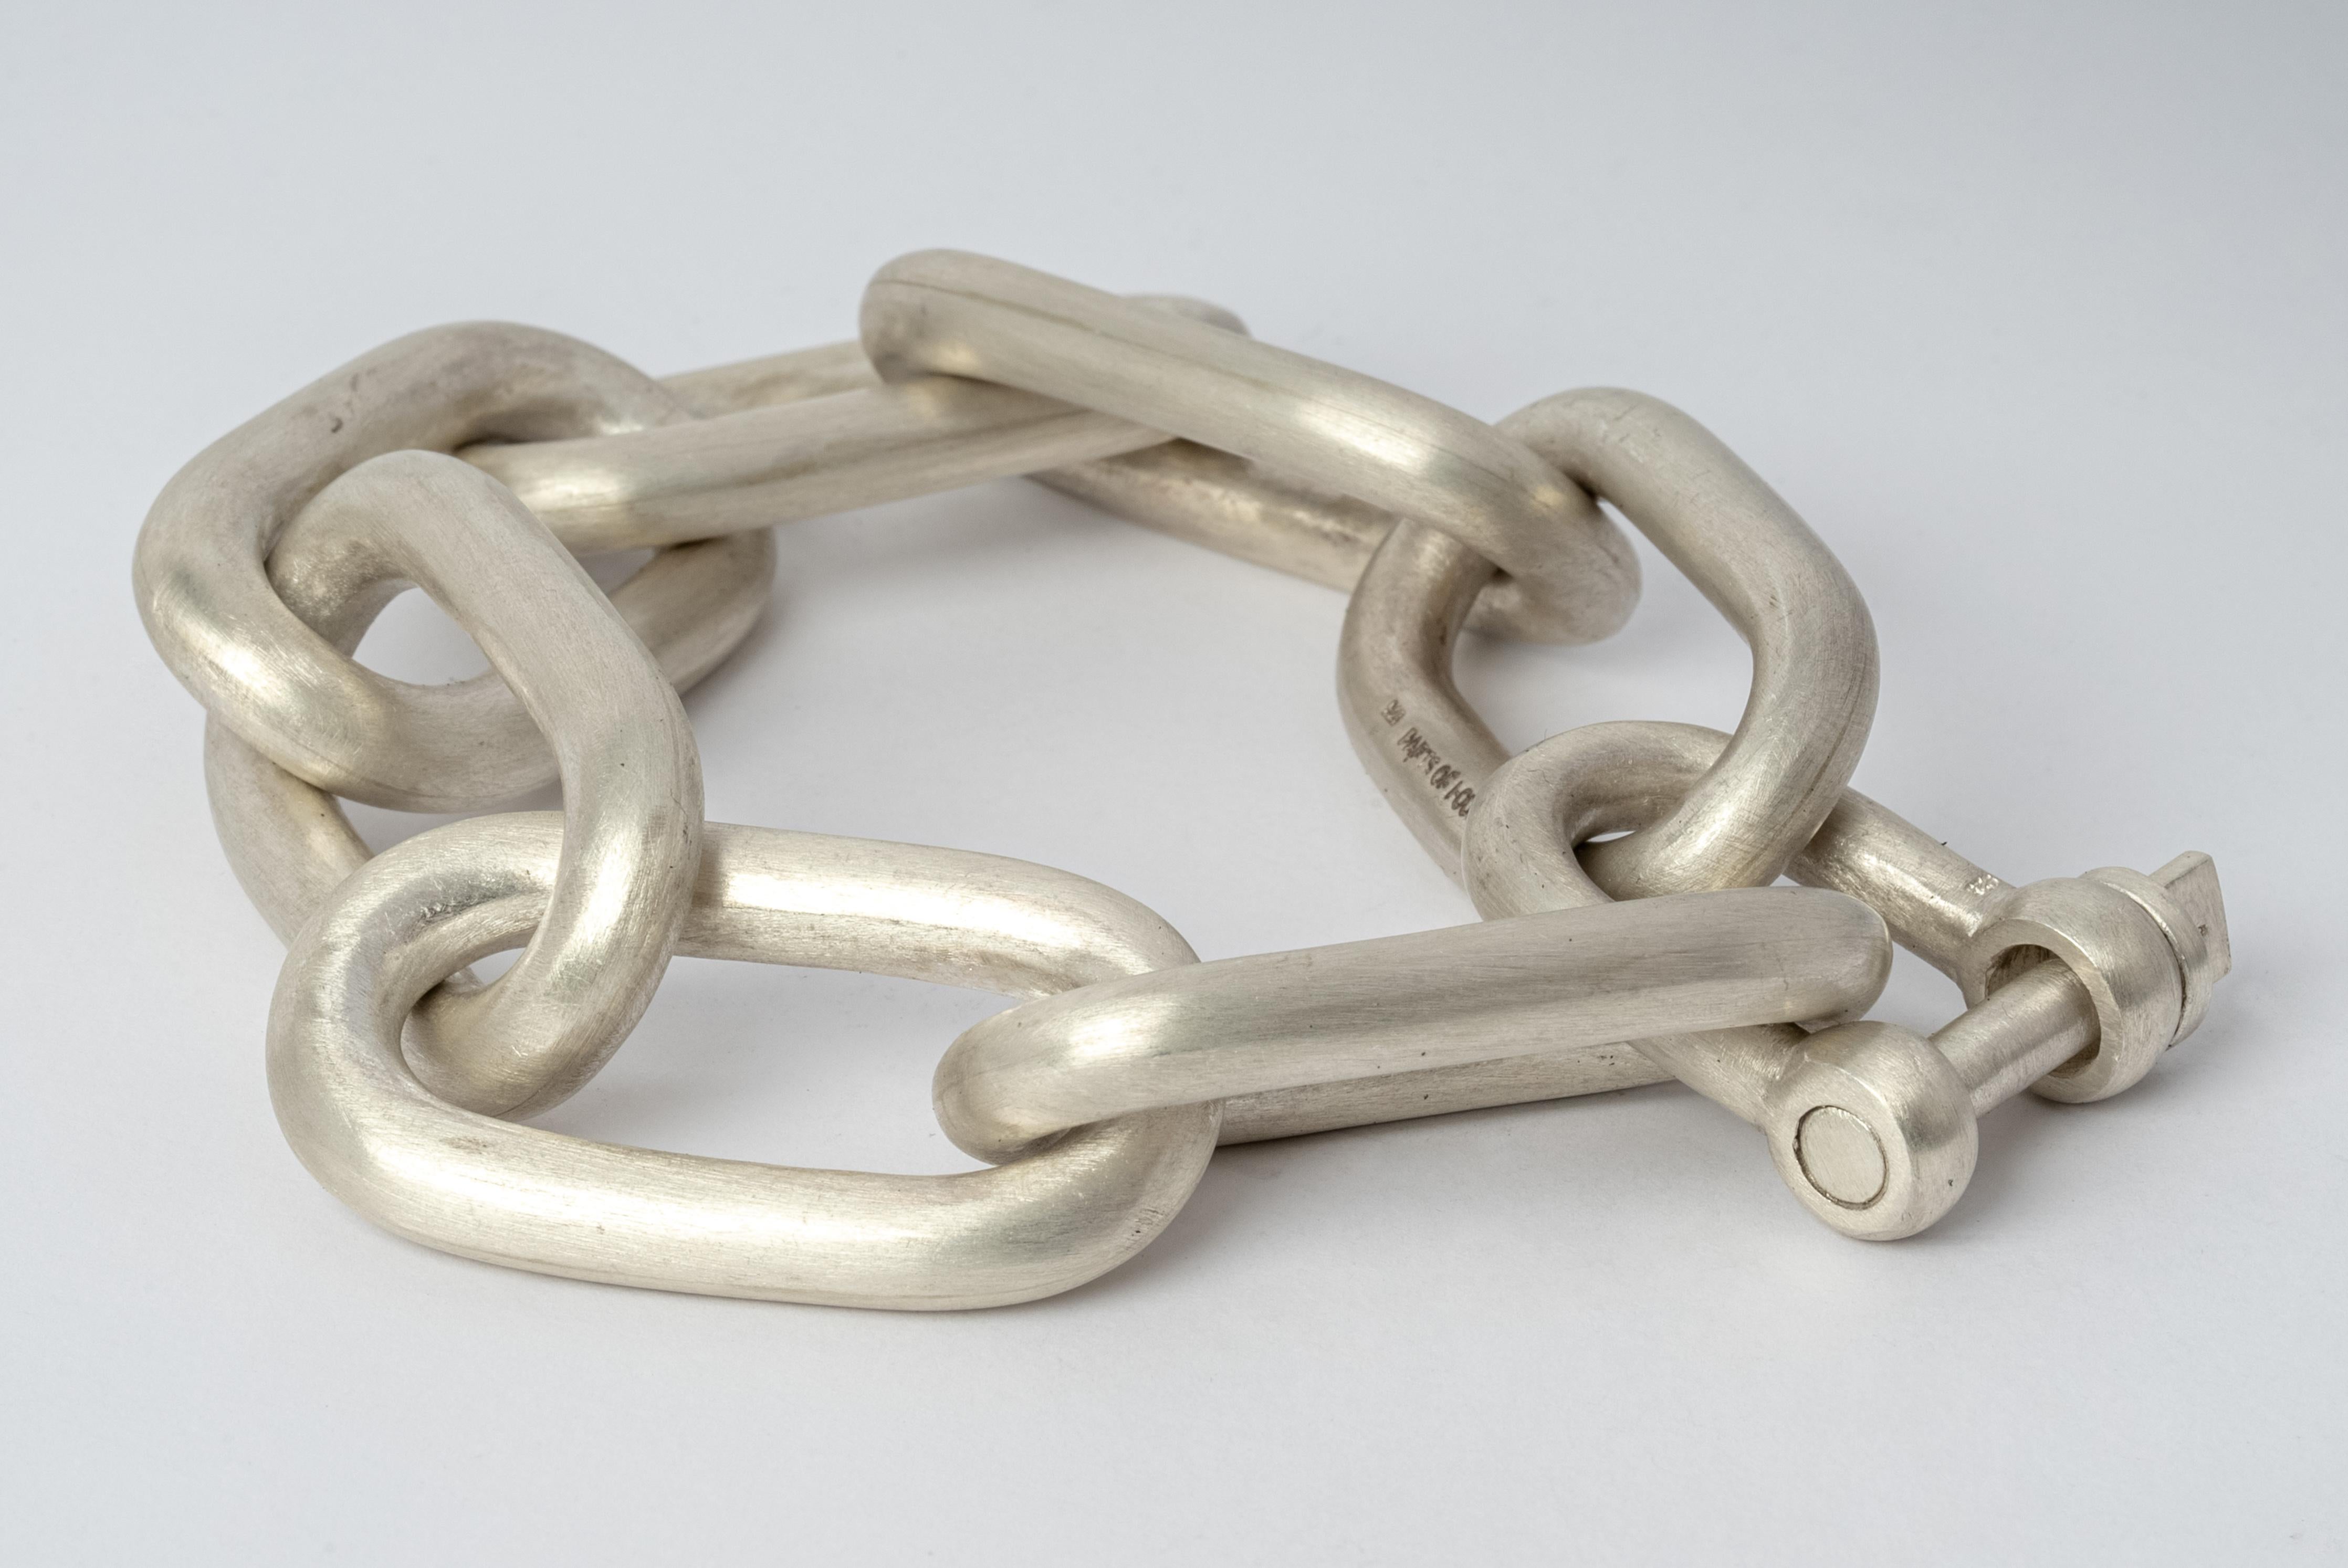 Bracelet in matte sterling silver. The Charm System is an interrelated group of products that can be mixed and matched or worn individually.
Dimensions:
Chain link size (L × H): 50 mm × 25 mm
U-bolt (H × W): 35 mm × 23 mm